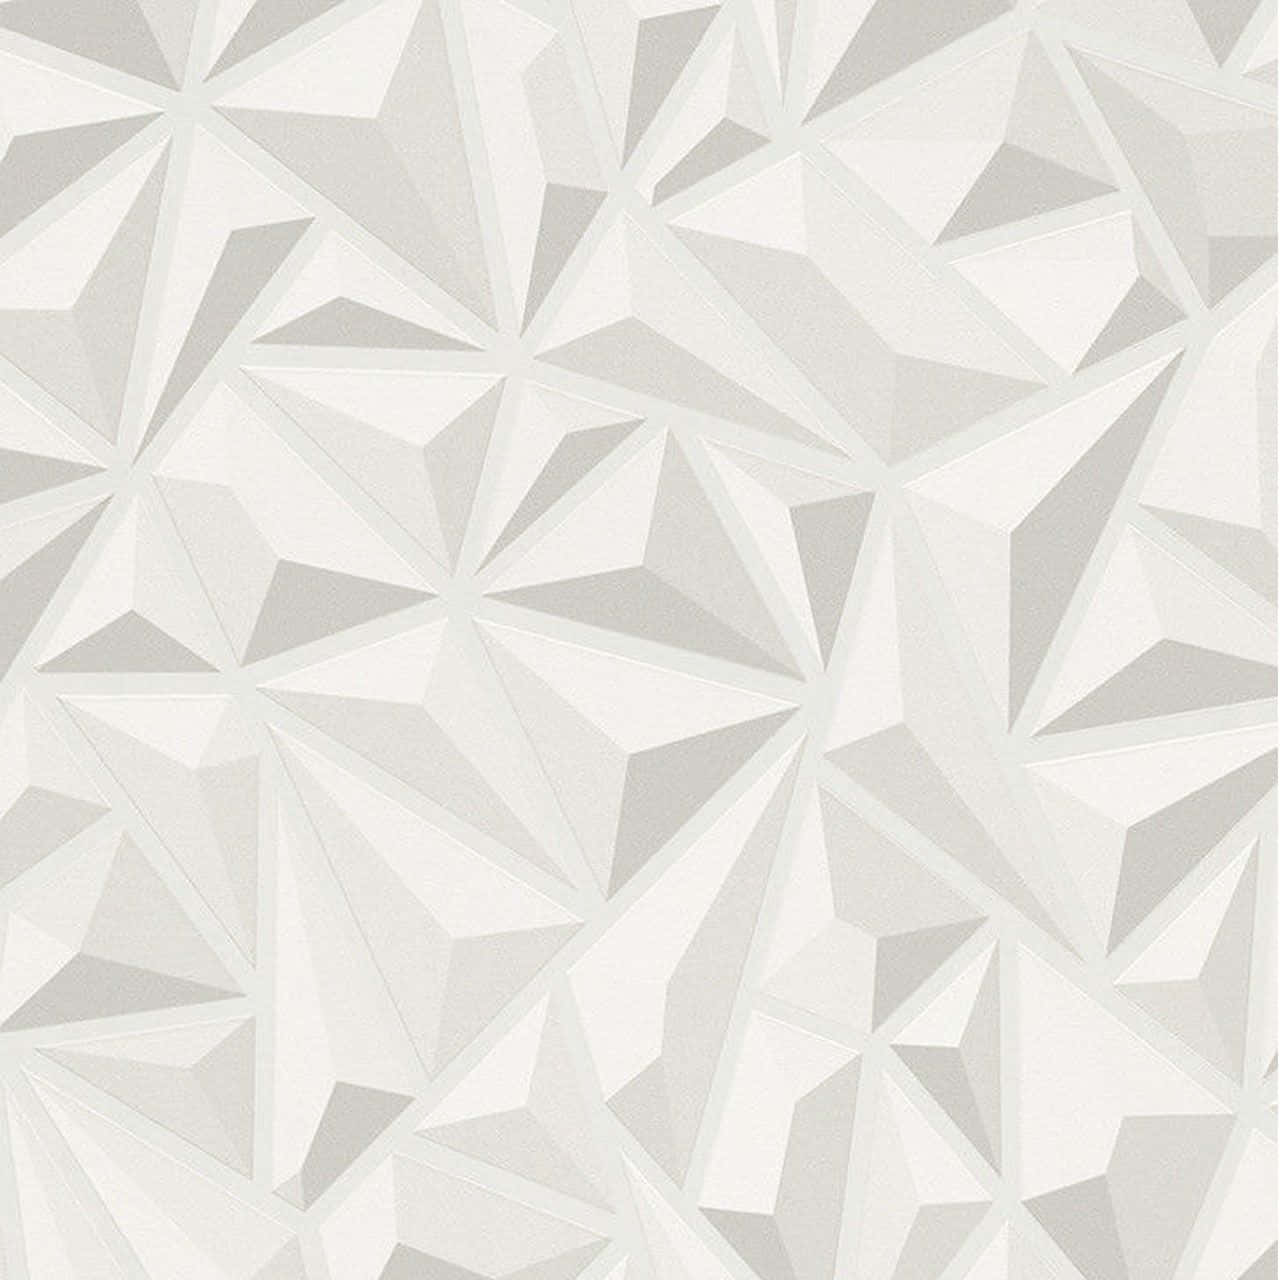 White Wall Background With Geometric Patterns